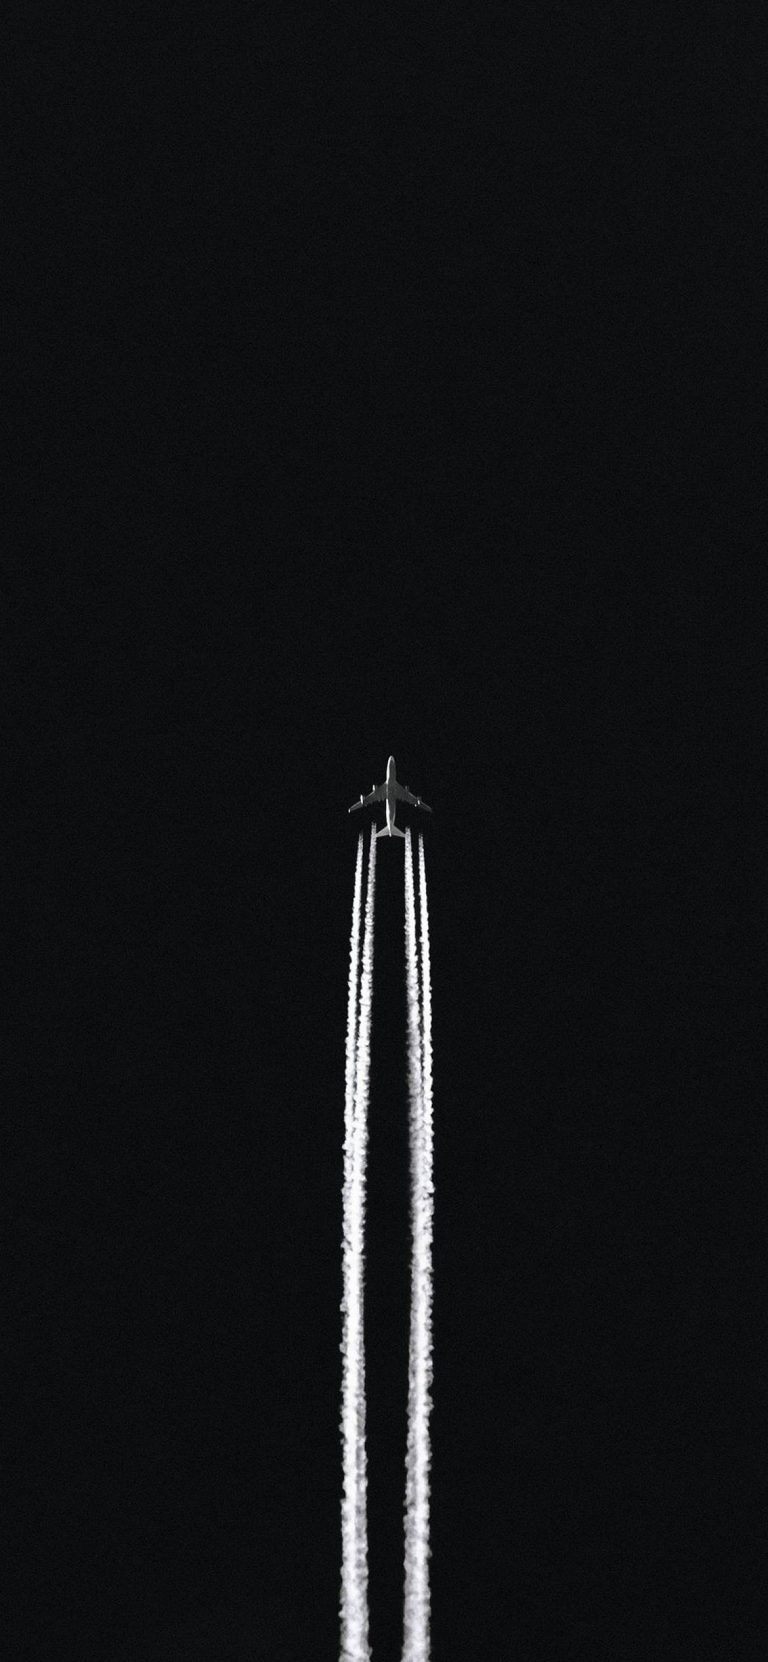 Black and White iPhone Wallpaper - 087